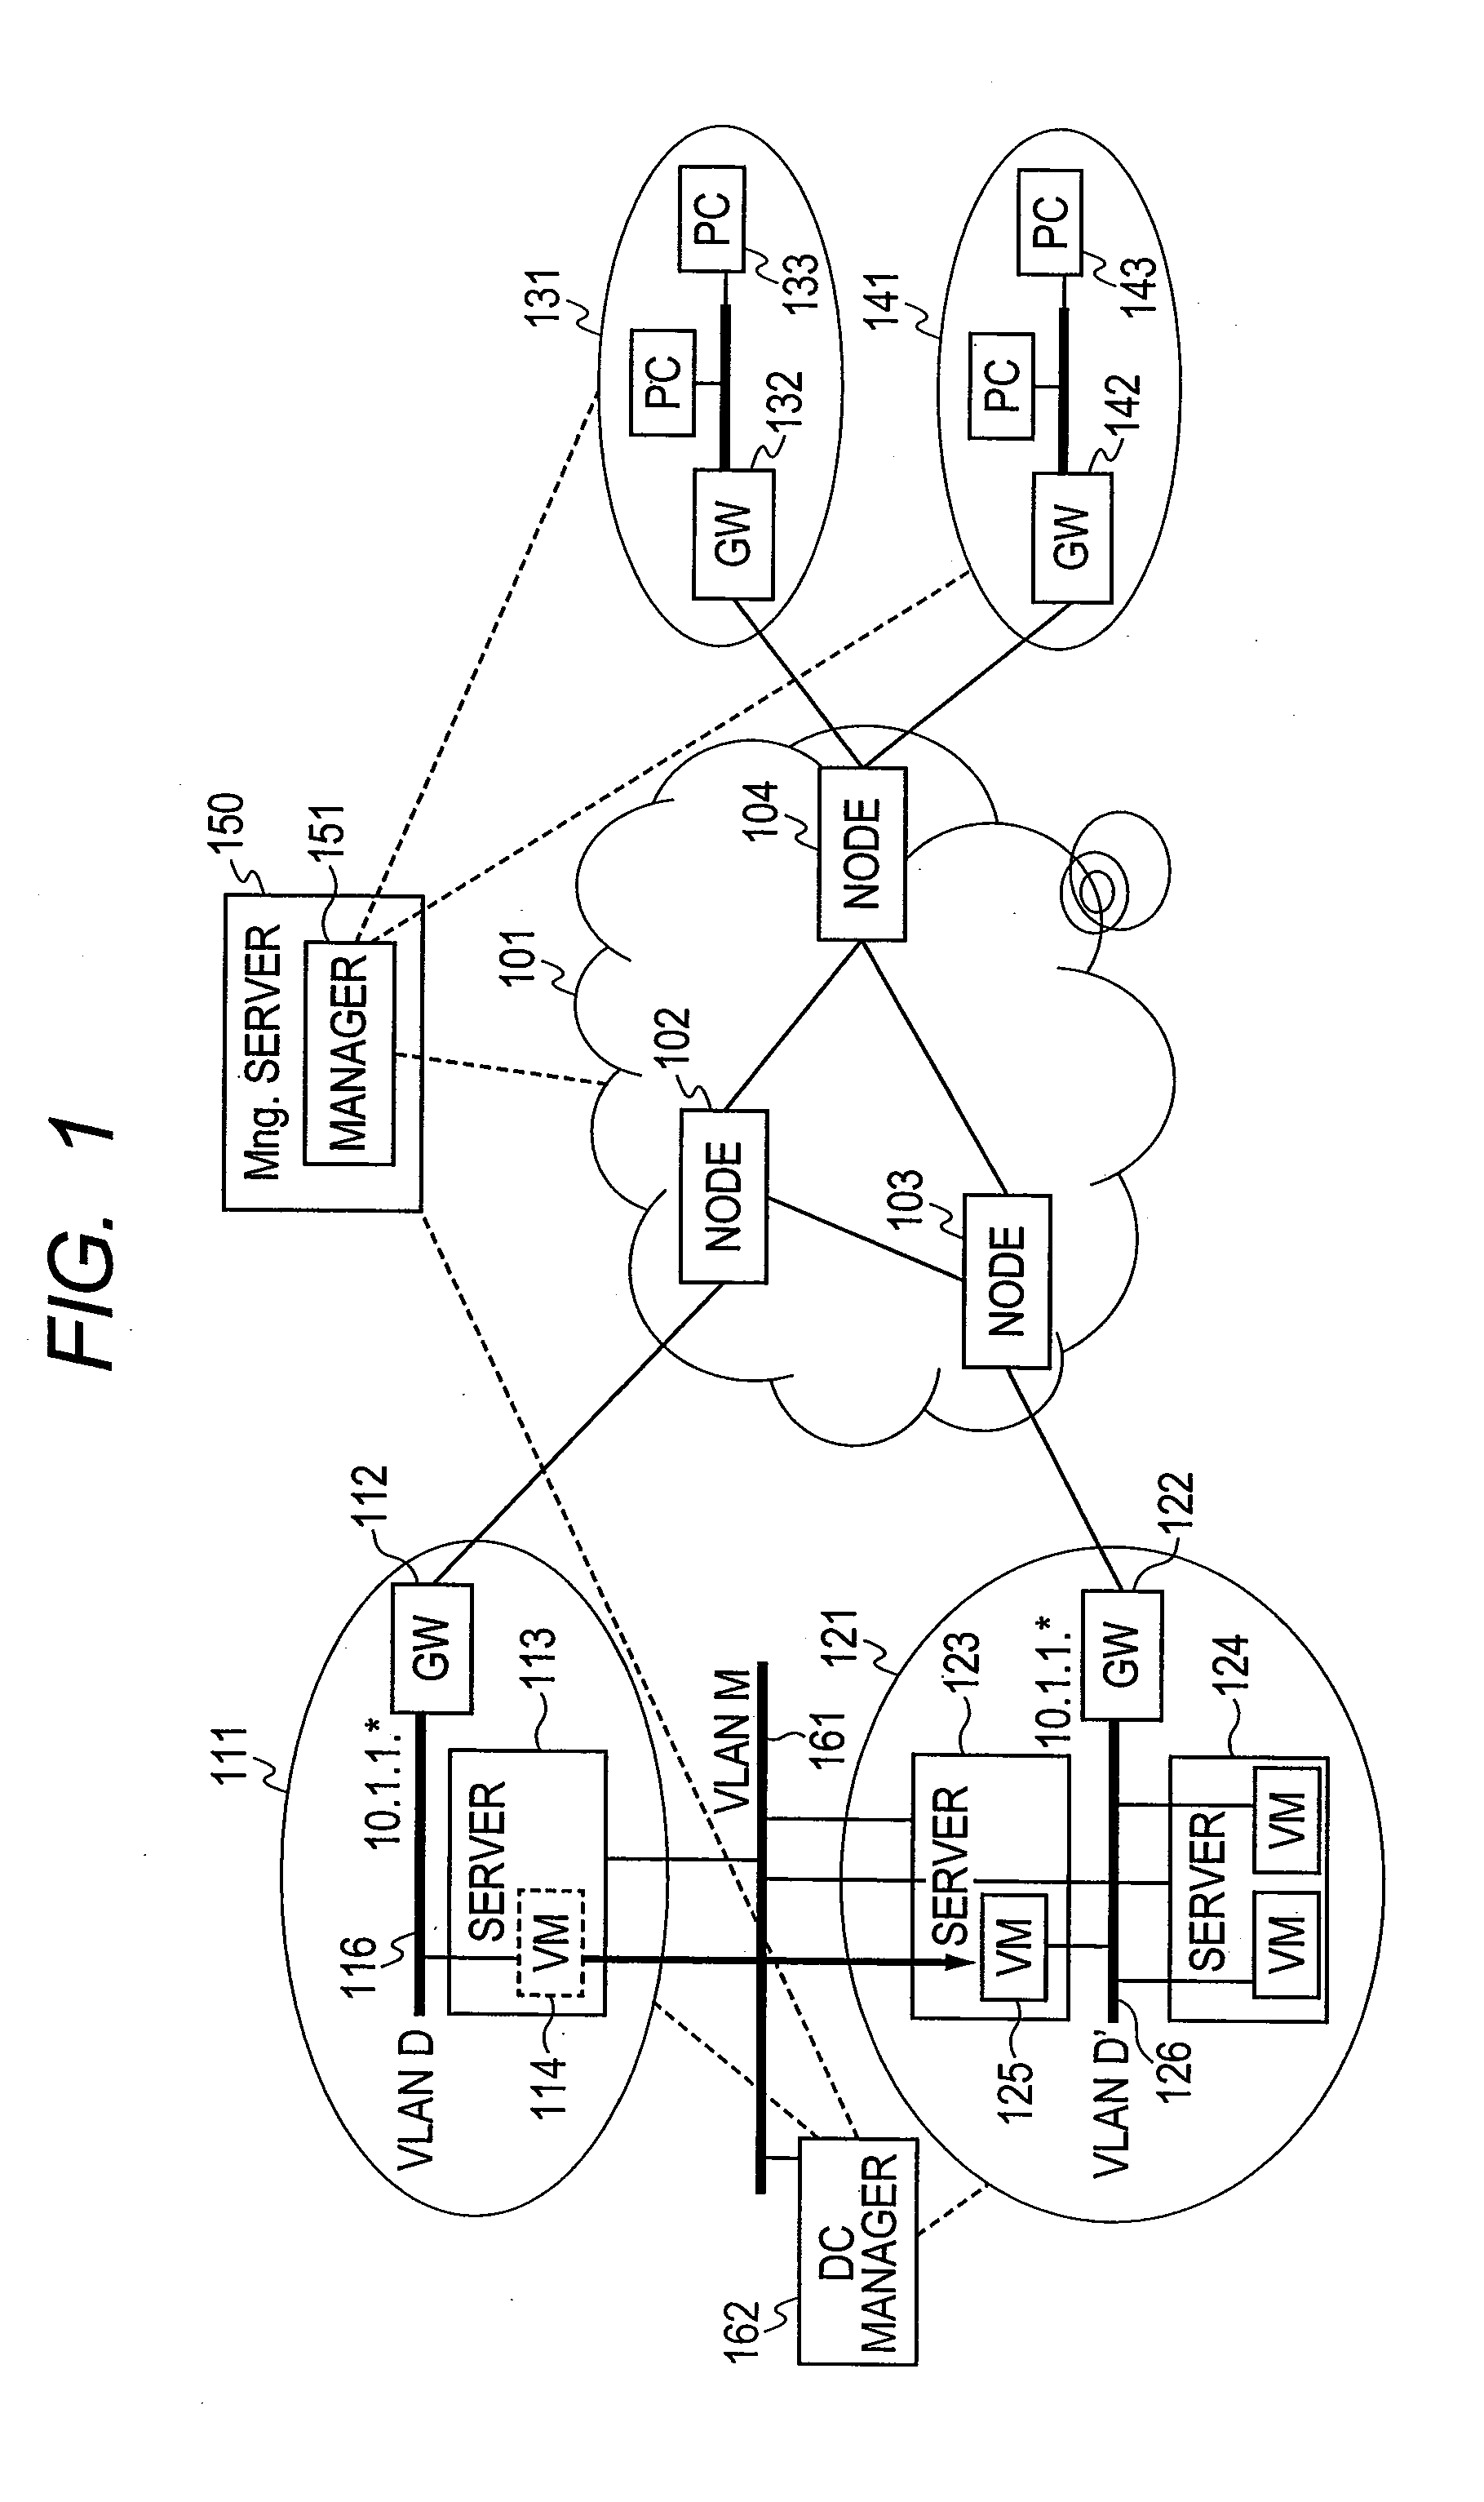 Method and system of virtual machine migration